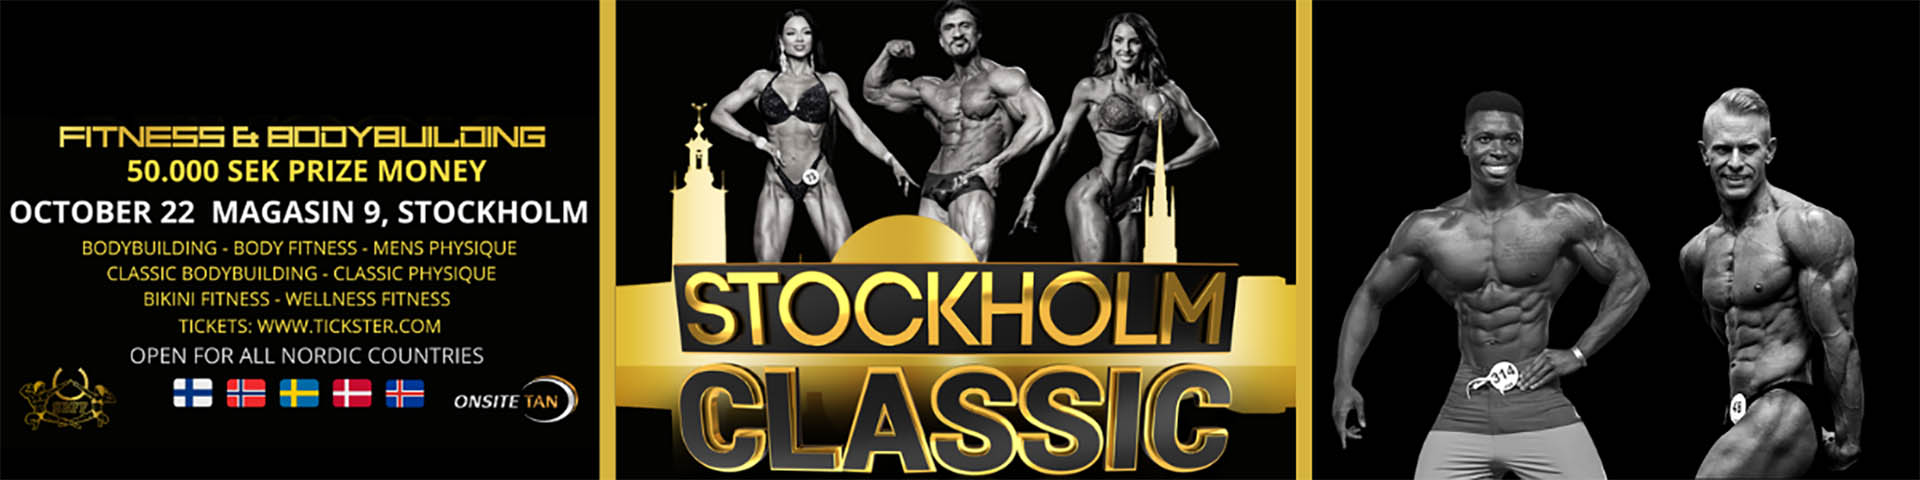 IFBB STOCKHOLM CLASSIC IFBB STOCKHOLM CLASSIC (INVITATIONAL NOT PRO QUALIFIER. OPEN TO NORDIC COUNTRIES)